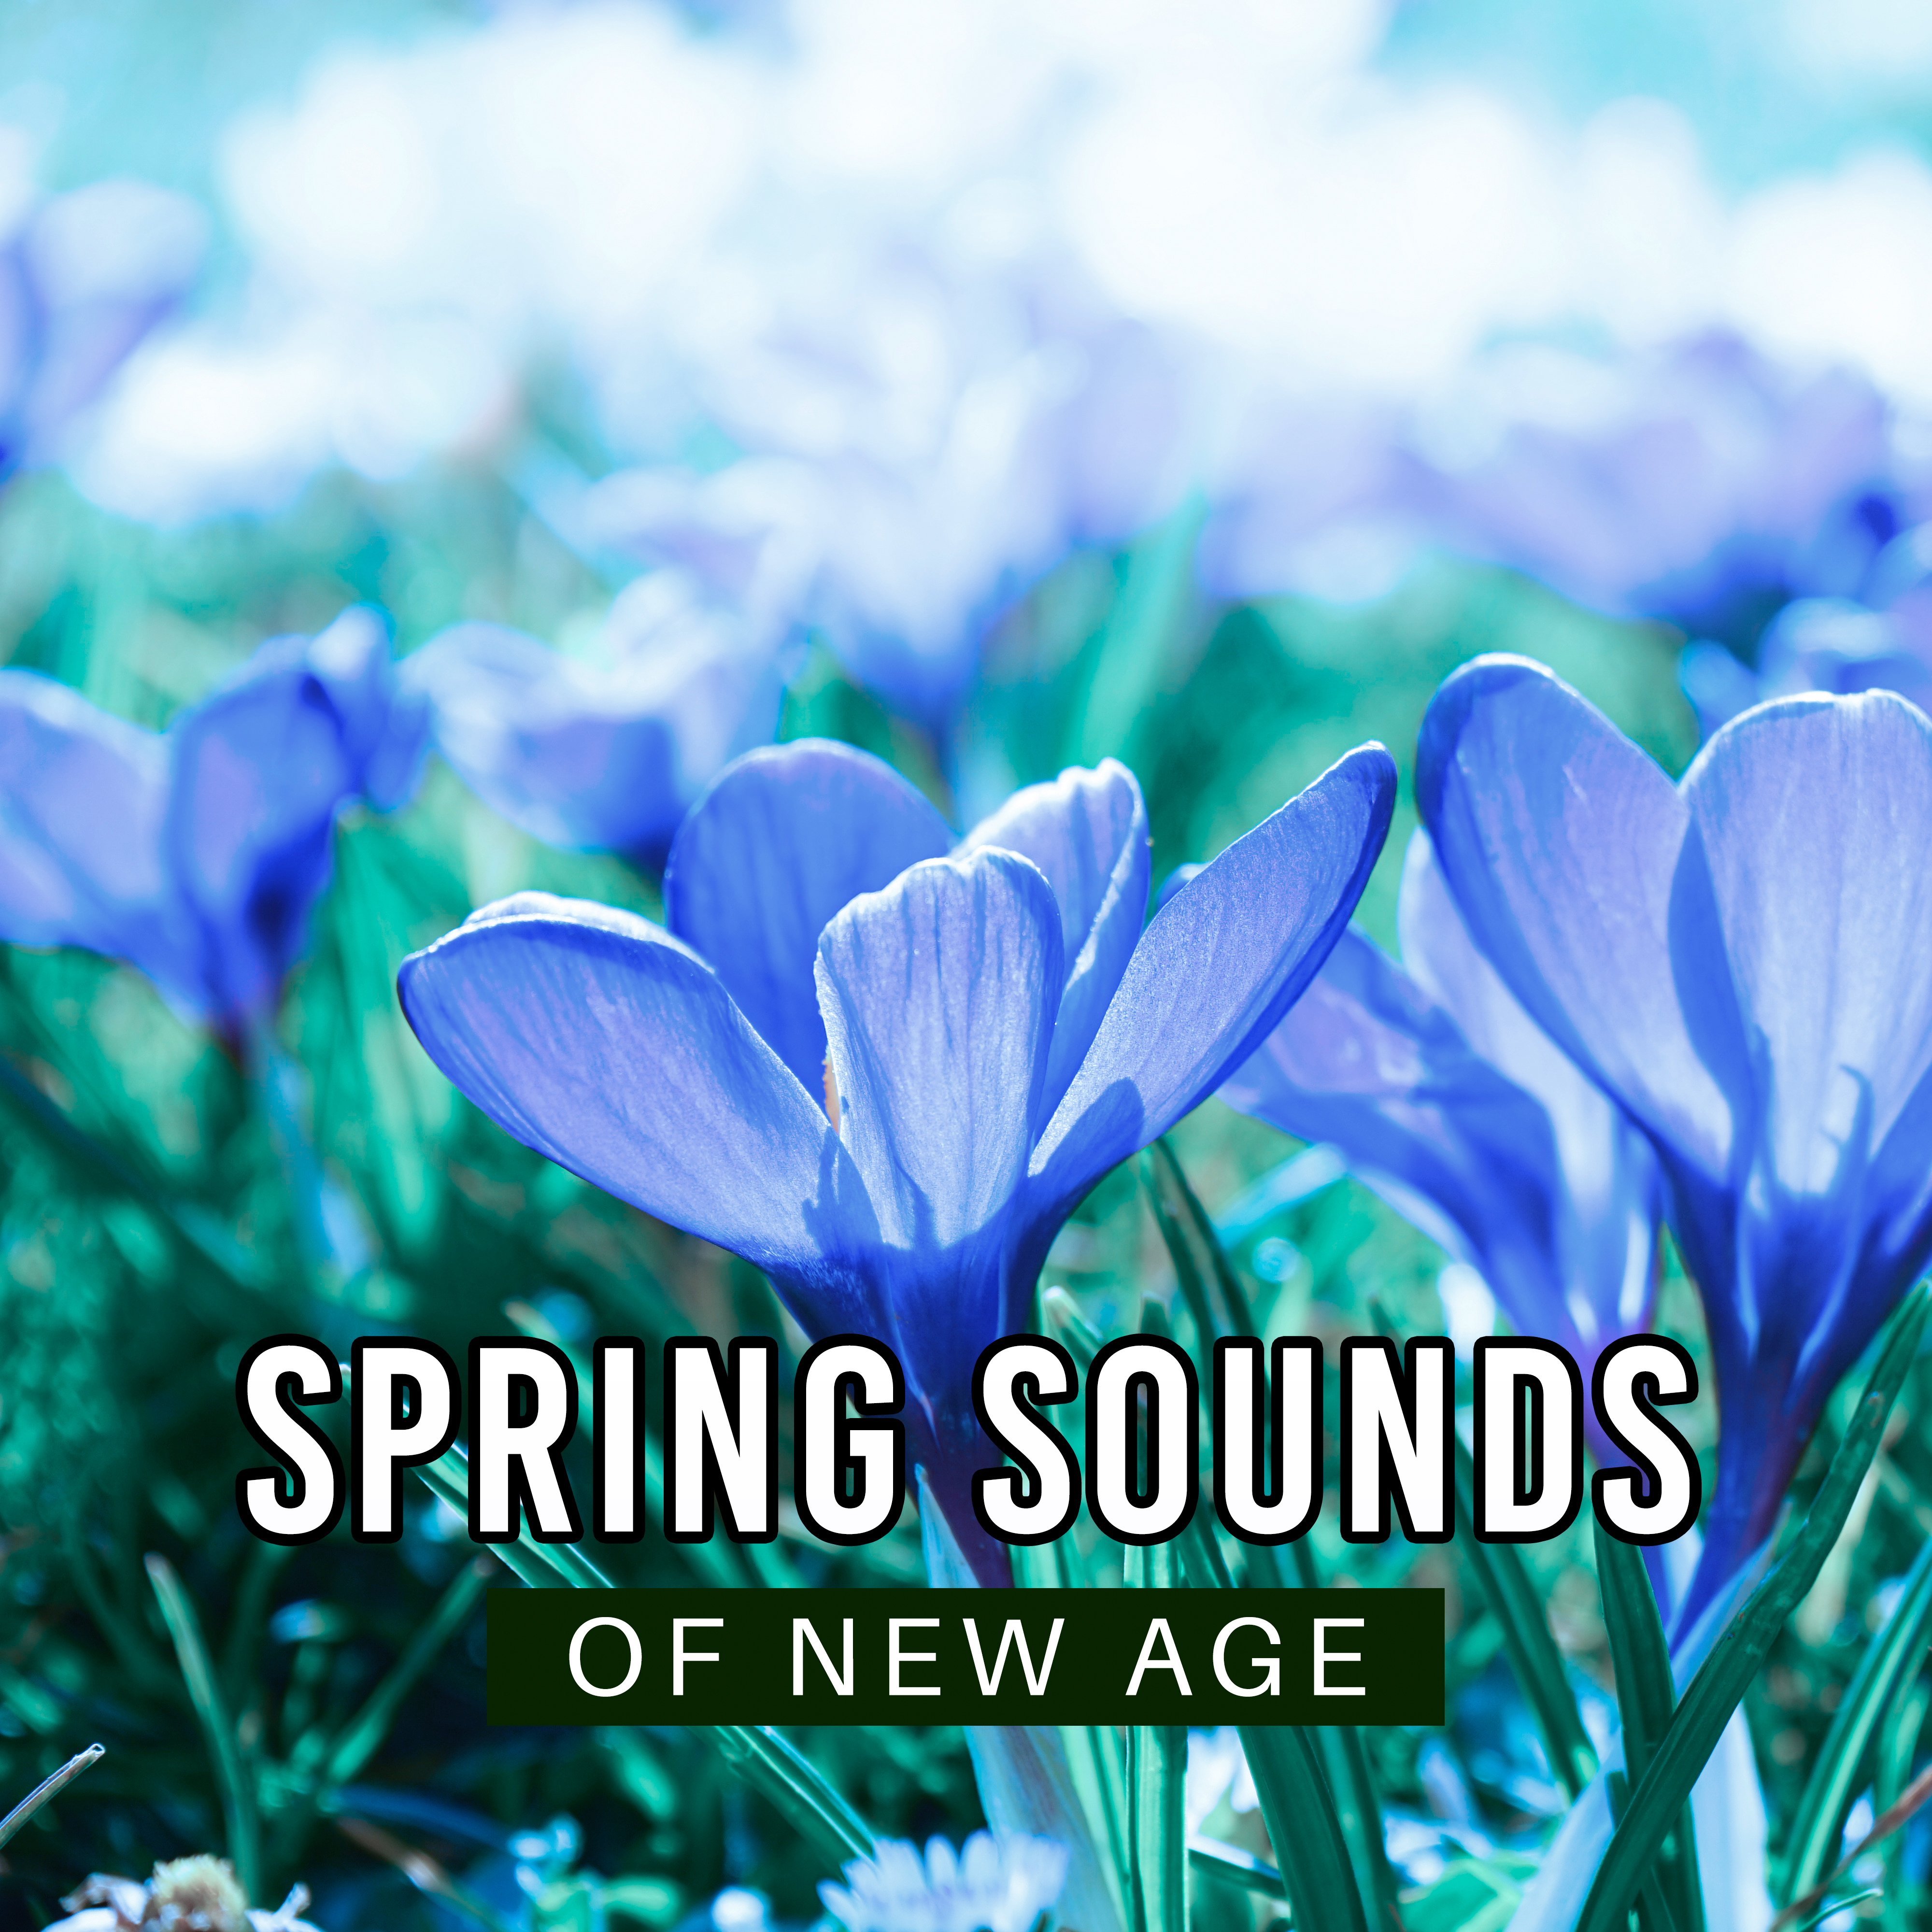 Spring Sounds of New Age – Calming Sounds of Nature, Birds, Water, Deep Relaxing Music, Meditation in the Nature